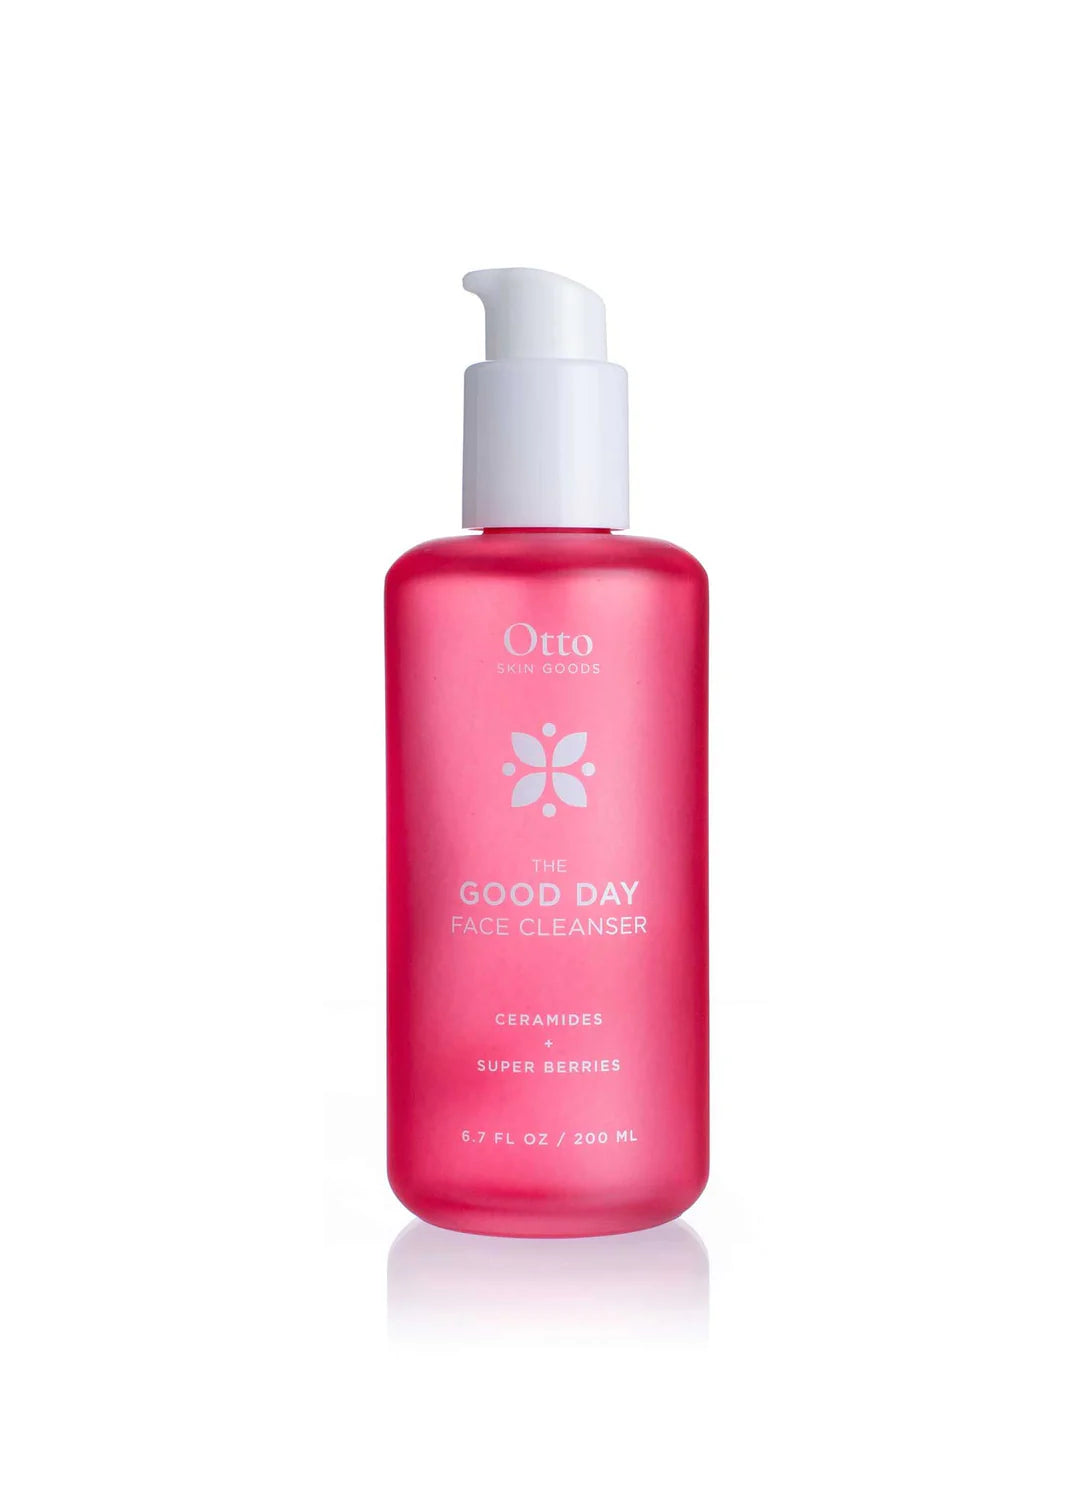 Good Day face cleanser